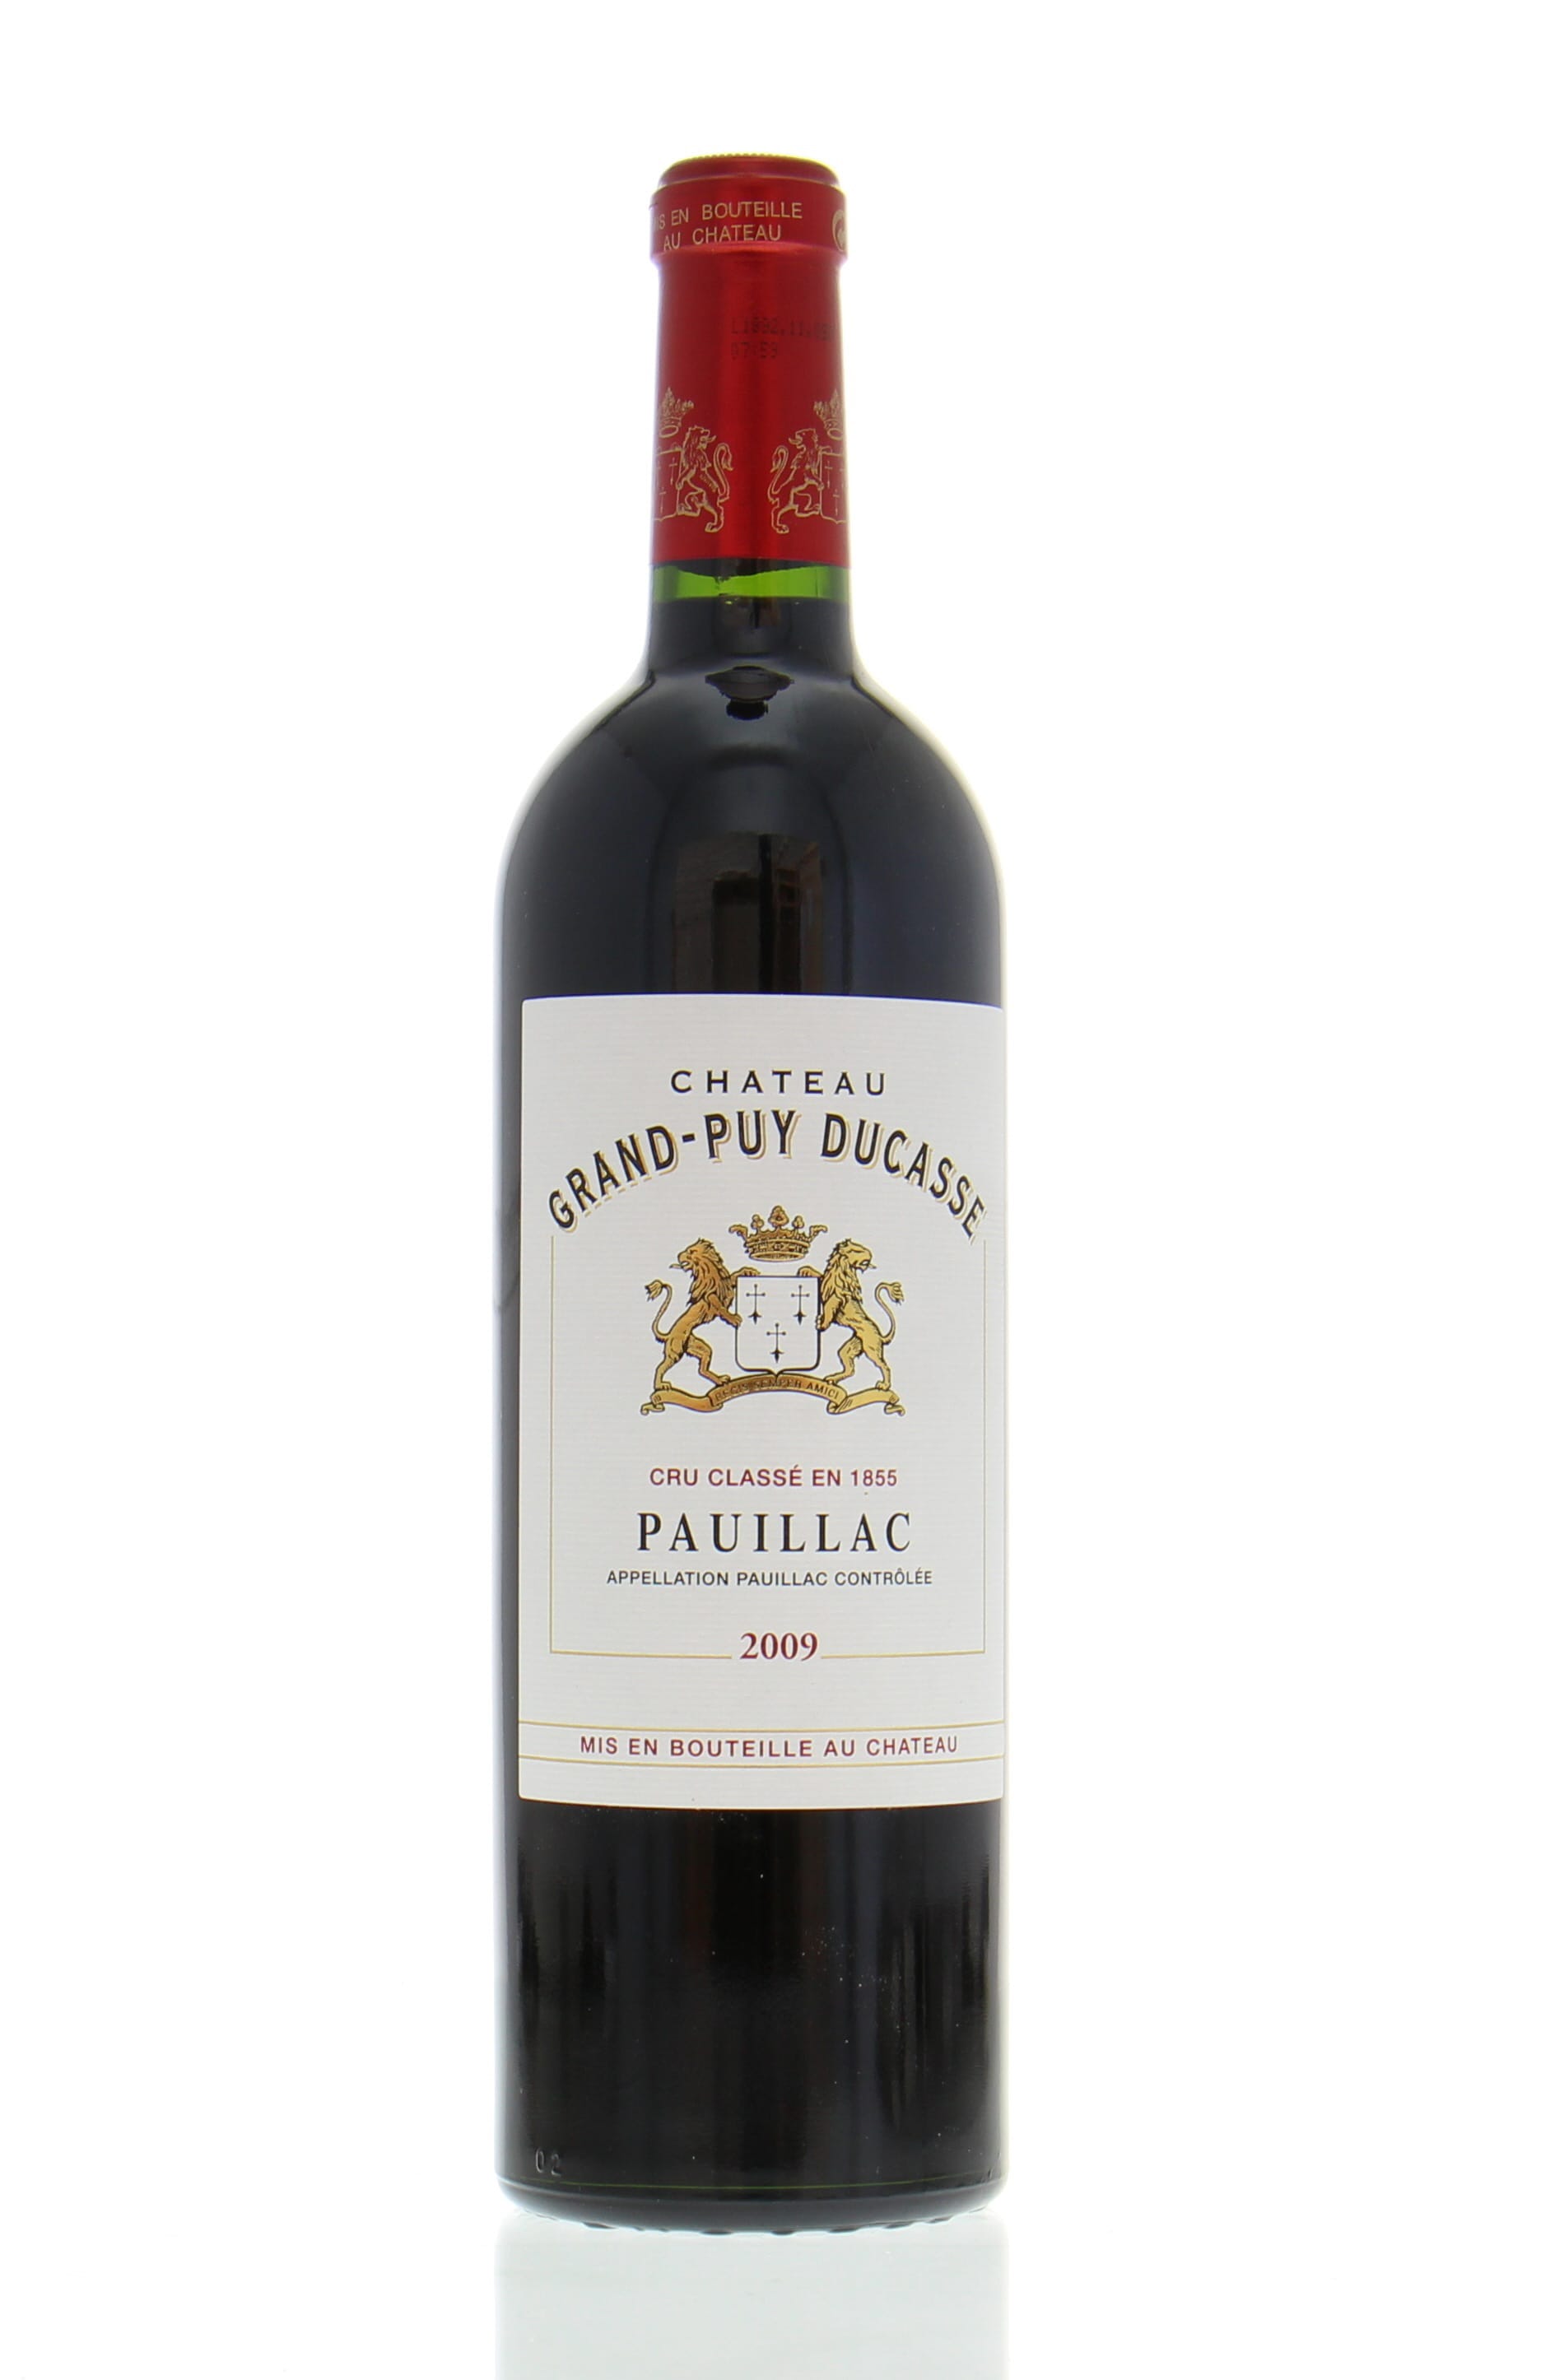 Chateau Grand Puy Ducasse - Chateau Grand Puy Ducasse 2009 Perfect